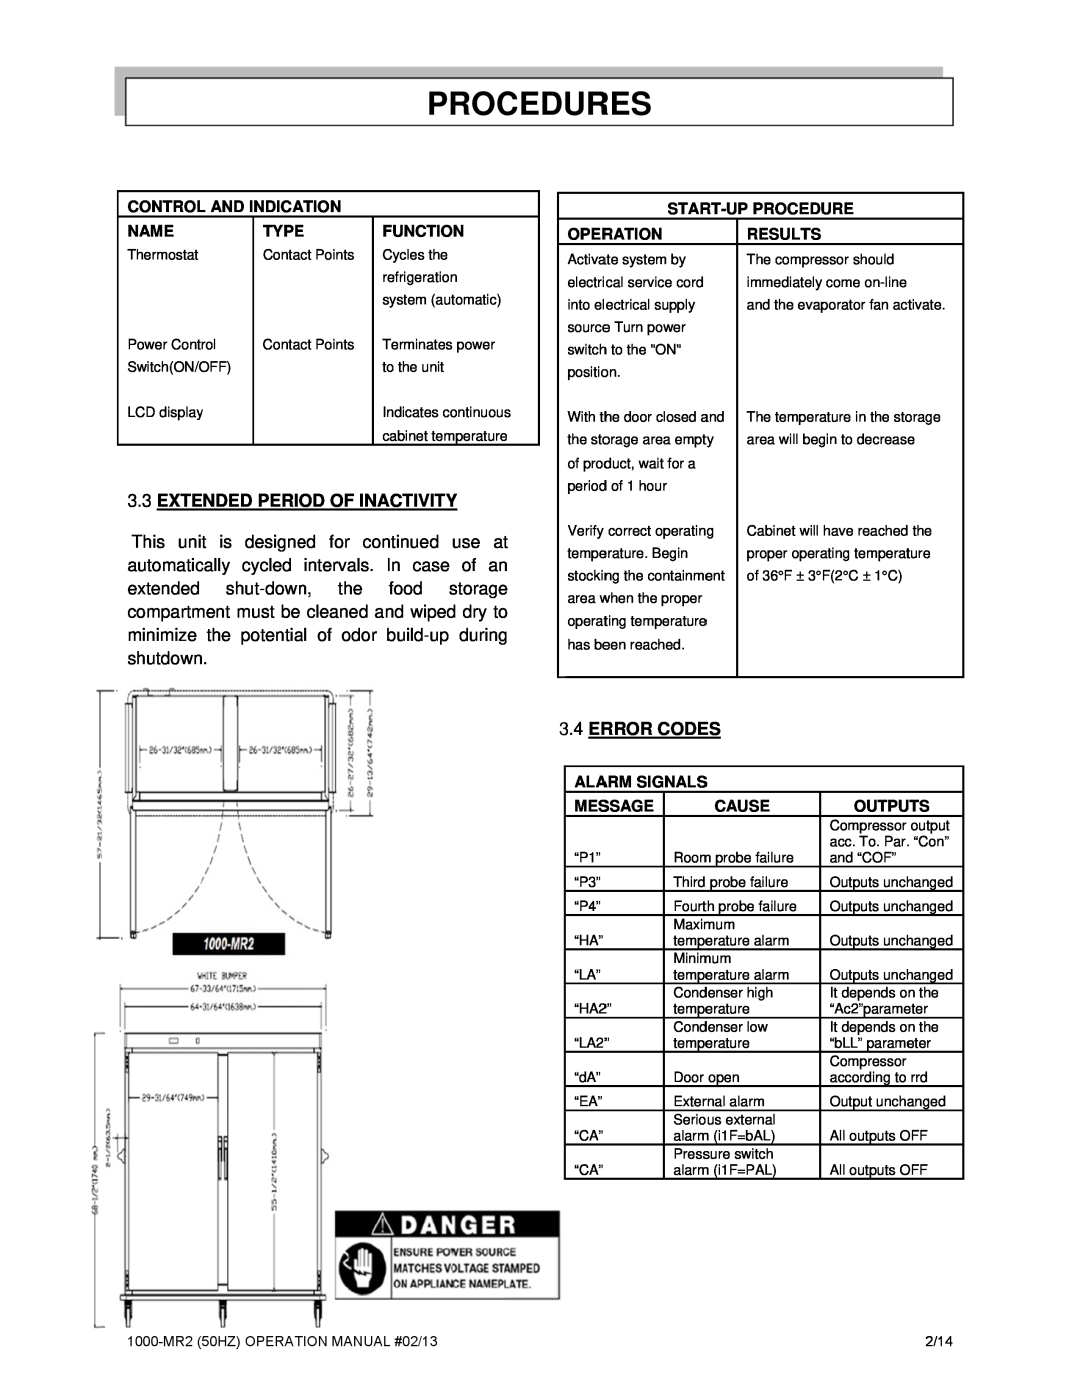 Alto-Shaam Mobile Refrigerated Cart manual Procedures, Extended Period Of Inactivity, Error Codes 